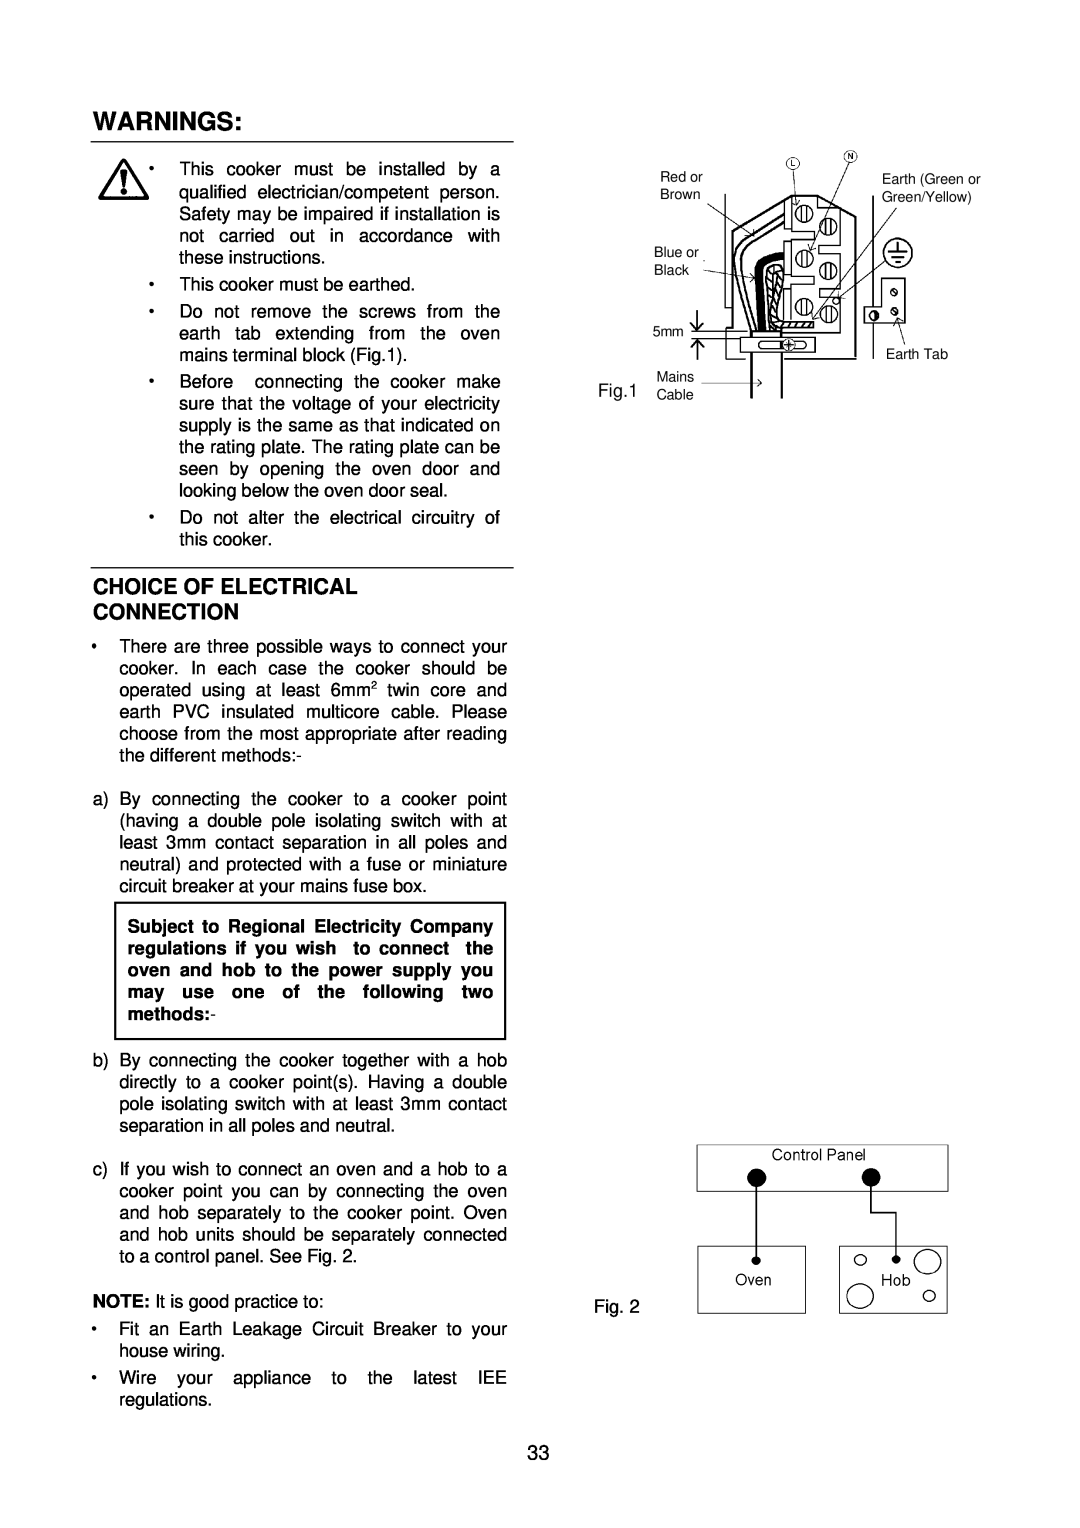 Electrolux D2160 installation instructions Warnings, Choice Of Electrical Connection 